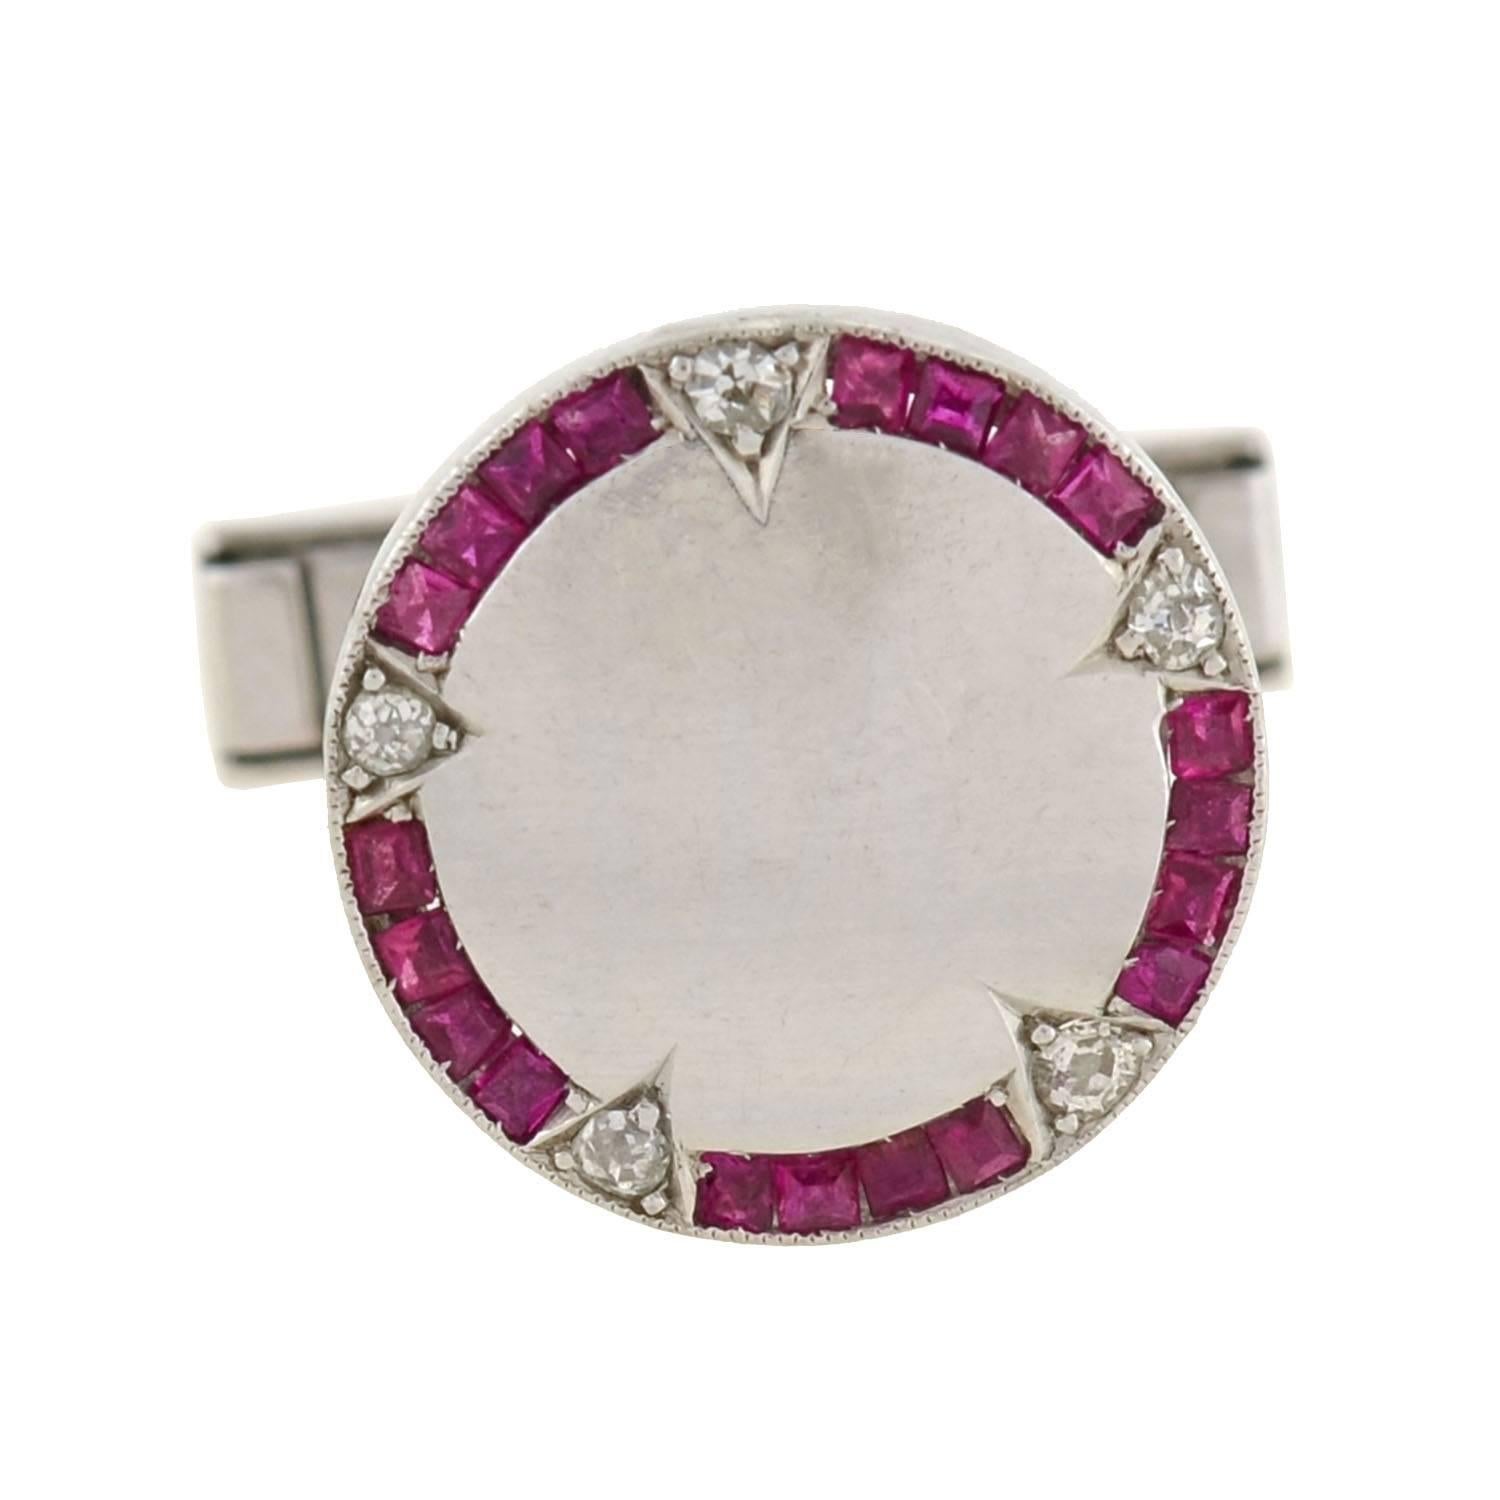 A very striking pair of cufflinks from the late Art Deco era (ca1930) era! Made of platinum and 14kt white gold, these attractive cufflinks are beautifully accented with vibrant rubies and diamonds. The platinum cufflink faces, which are round in